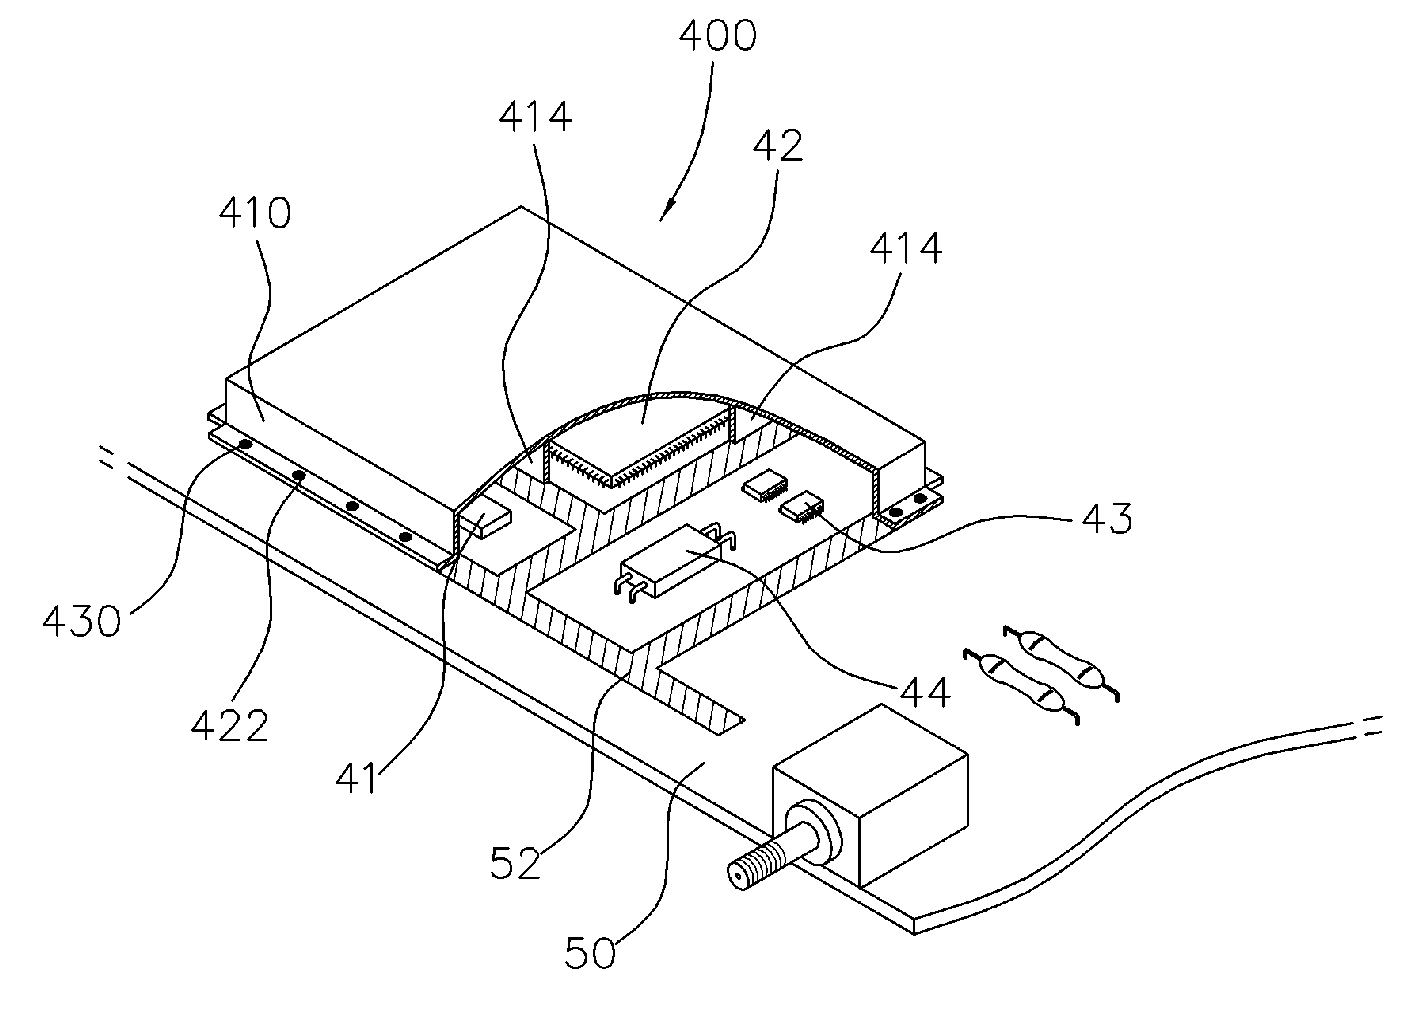 Easily solderable shield case for electromagnetic wave shielding